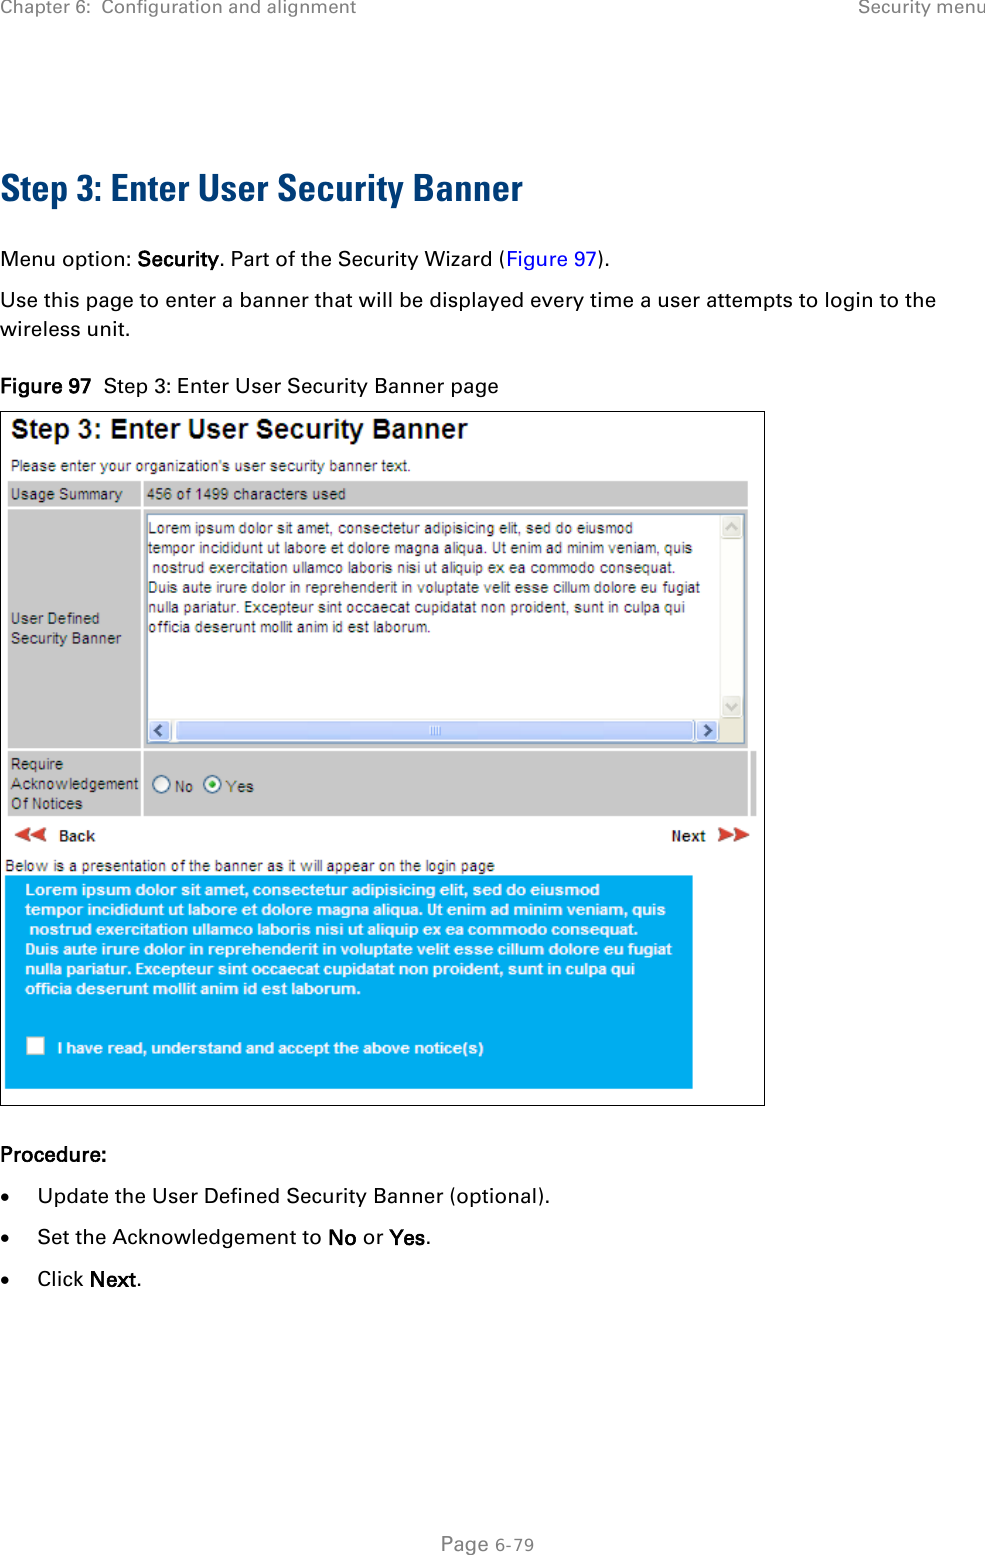 Chapter 6:  Configuration and alignment Security menu   Step 3: Enter User Security Banner Menu option: Security. Part of the Security Wizard (Figure 97). Use this page to enter a banner that will be displayed every time a user attempts to login to the wireless unit.  Figure 97  Step 3: Enter User Security Banner page  Procedure: • Update the User Defined Security Banner (optional). • Set the Acknowledgement to No or Yes. • Click Next.  Page 6-79 